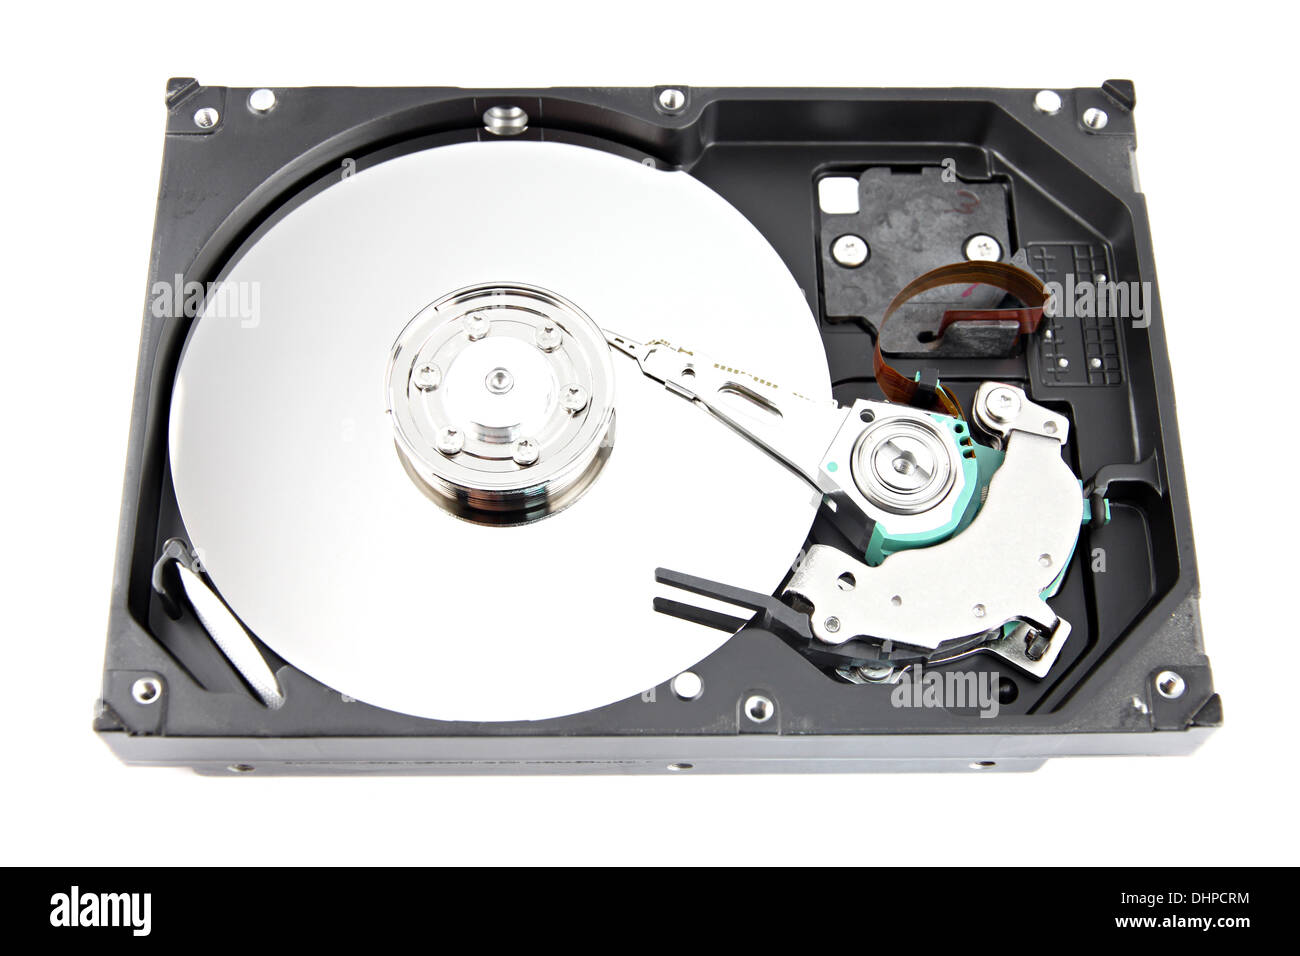 The Hard drive Open the top cover off on white background. Stock Photo